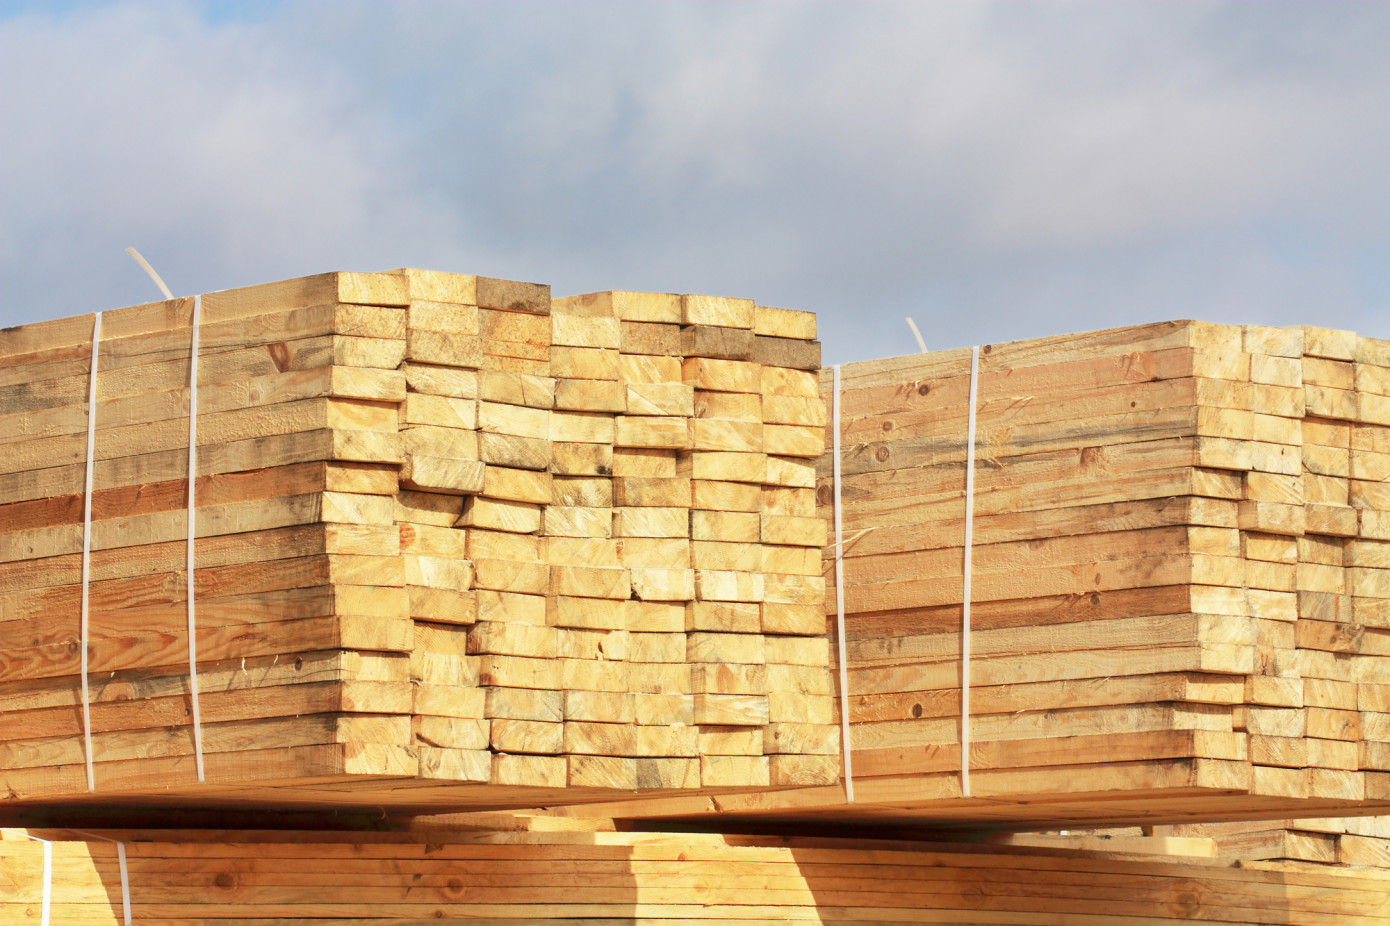 Sweden"s softwood lumber exports decline by 25% in Q1 2023; UK demand surges by 33%